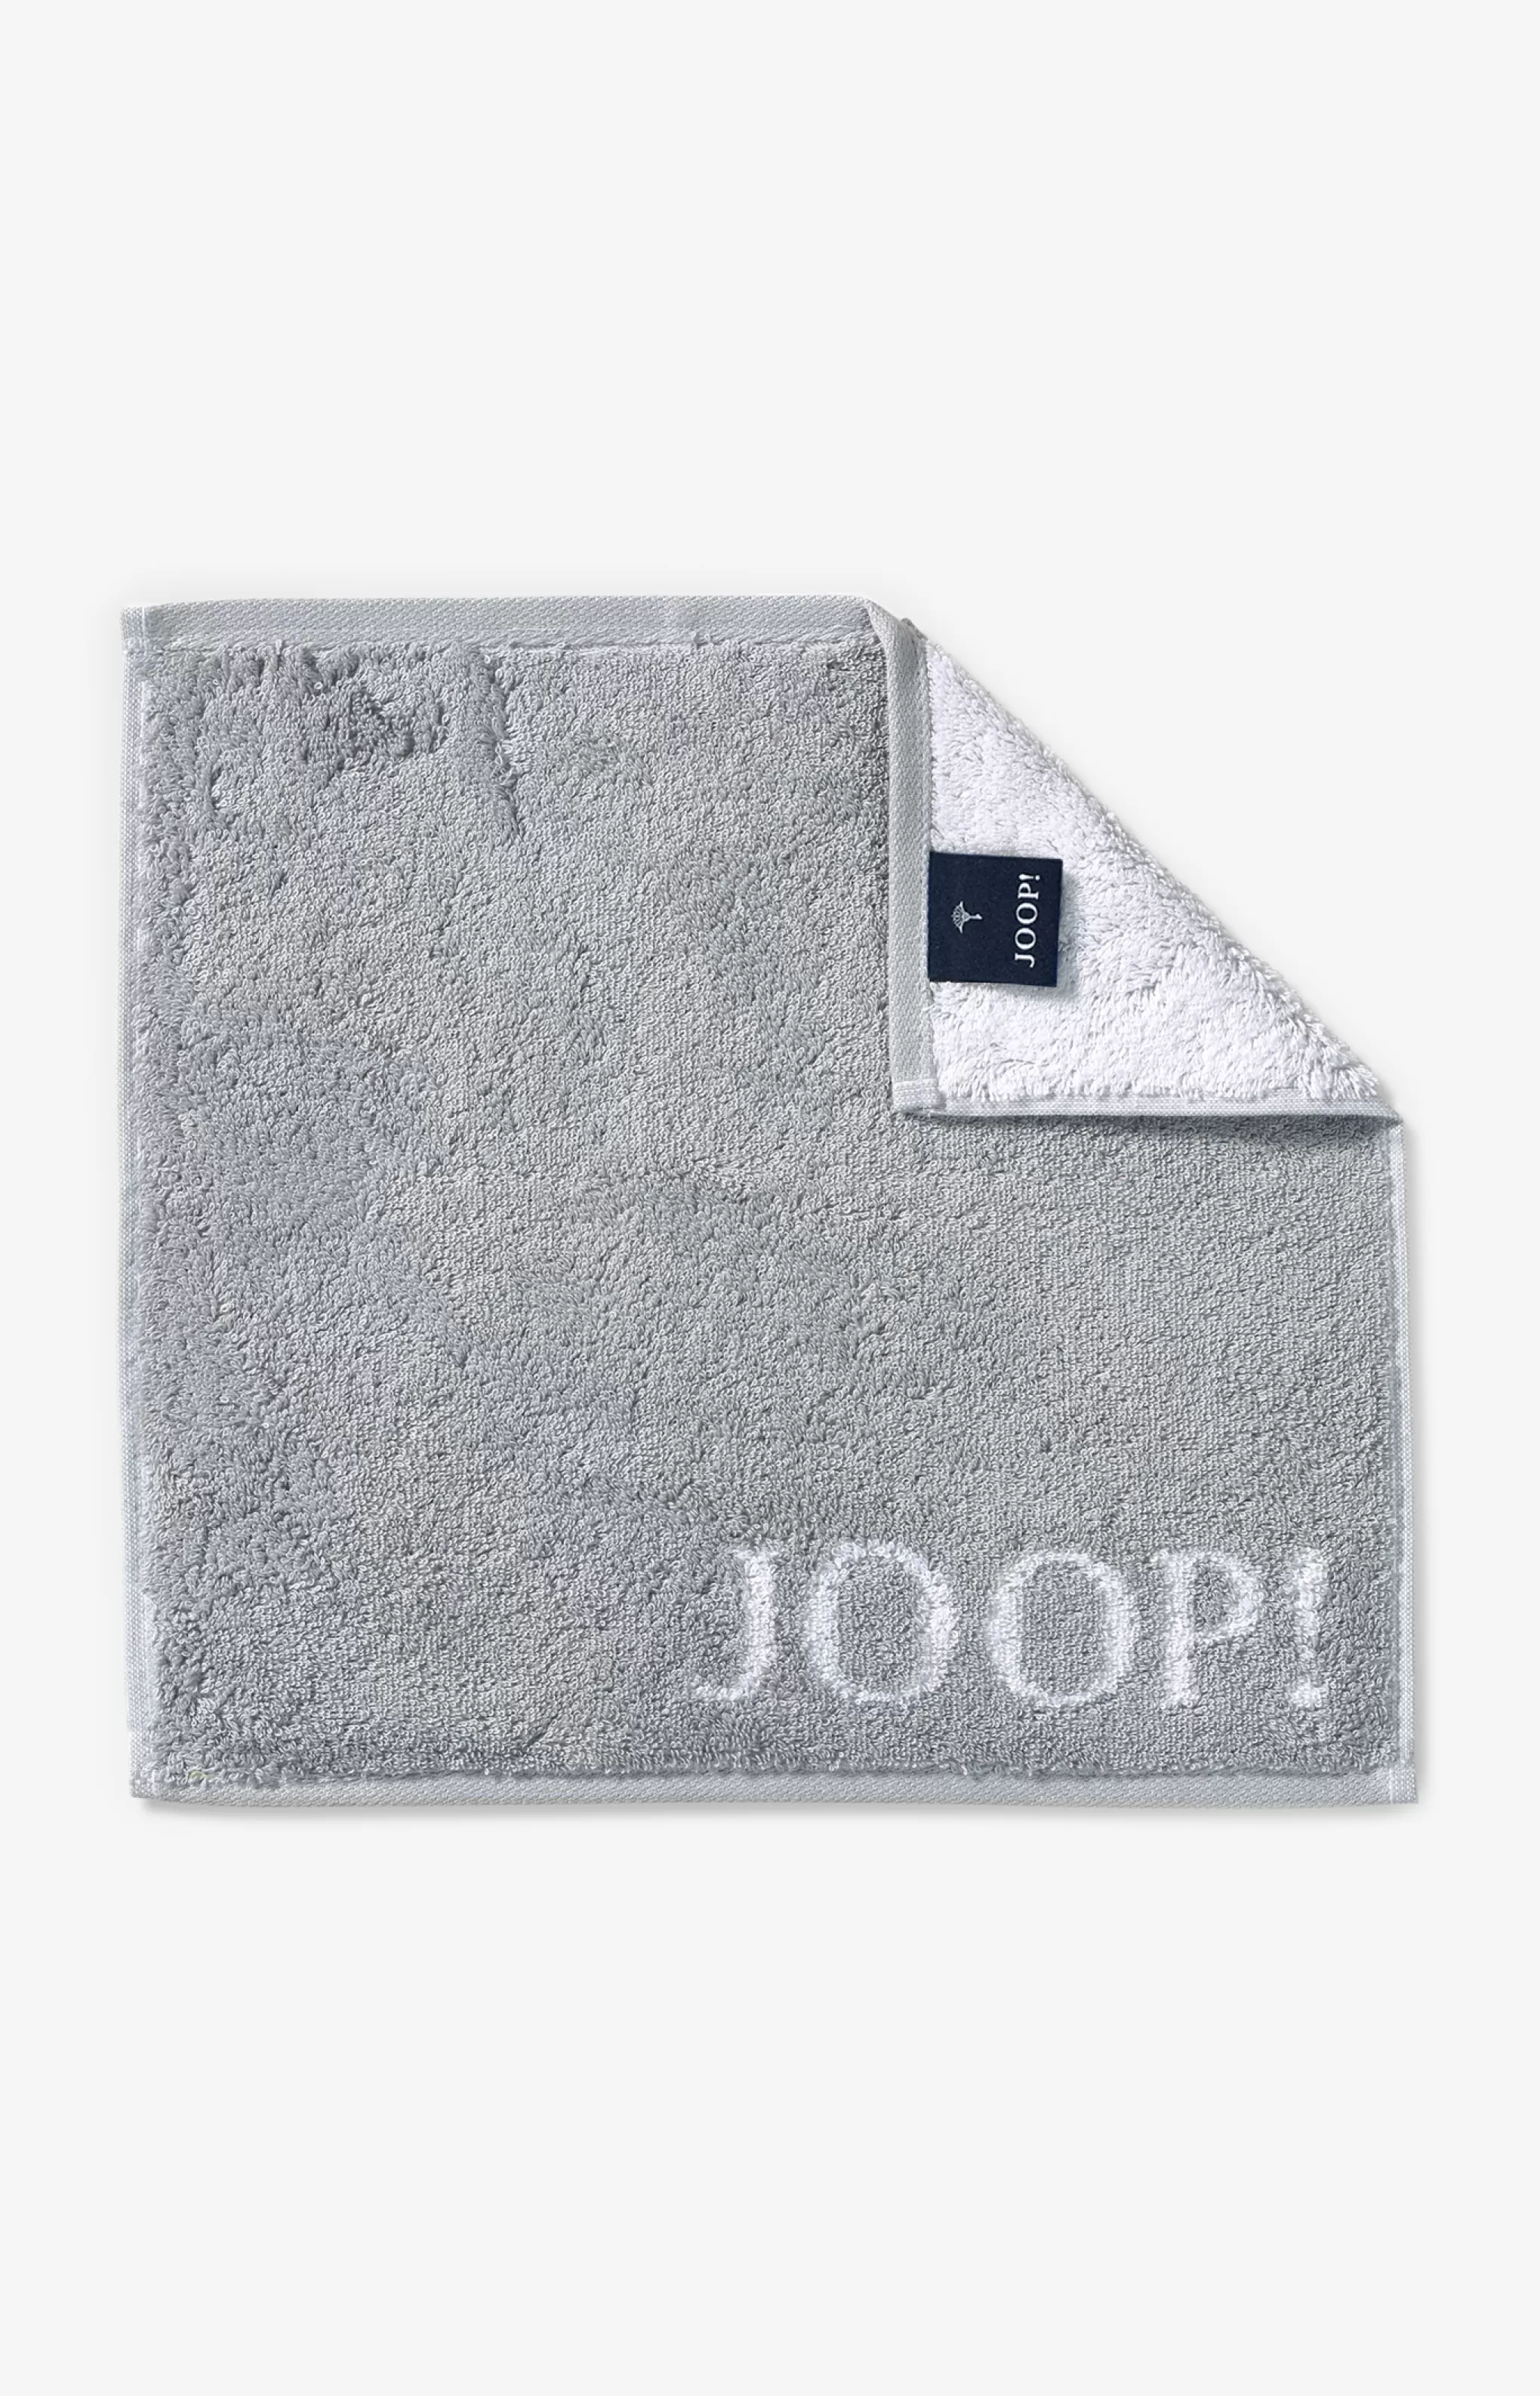 - Soapcloth | Discover Everything*JOOP - Soapcloth | Discover Everything Classic Doubleface French Ferry Series, Silver Grey